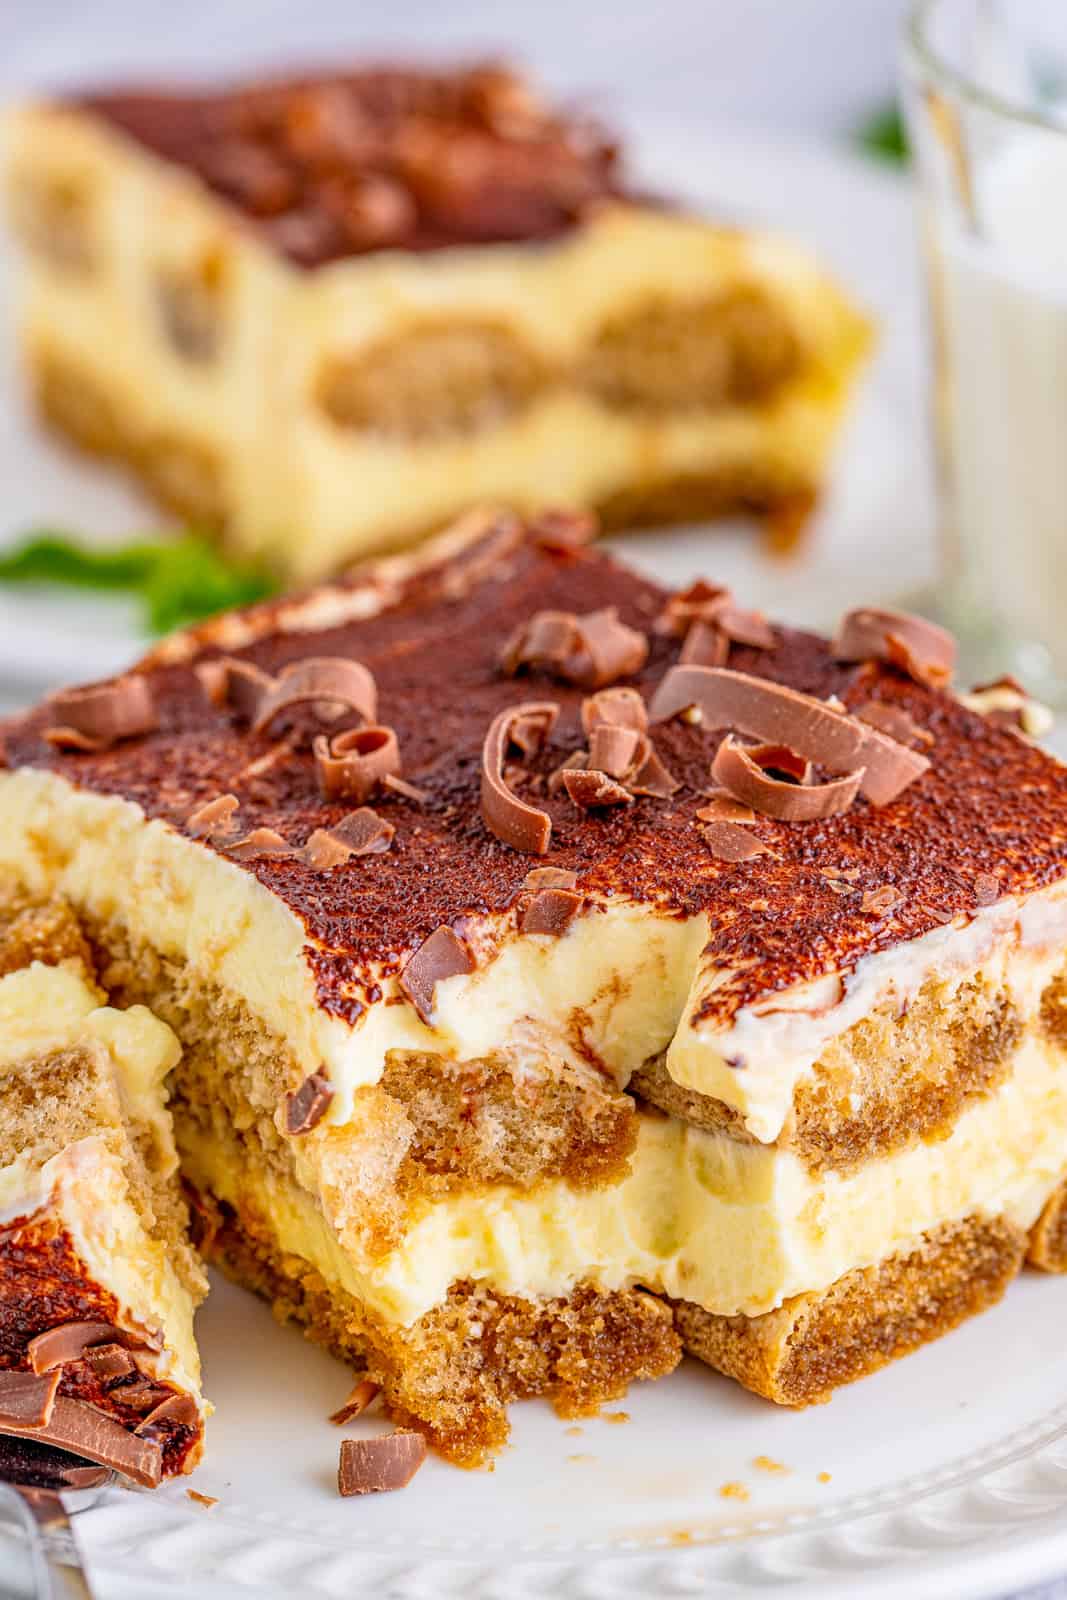 The Best Tiramisu Recipe slice on plate with bite taken out of it.